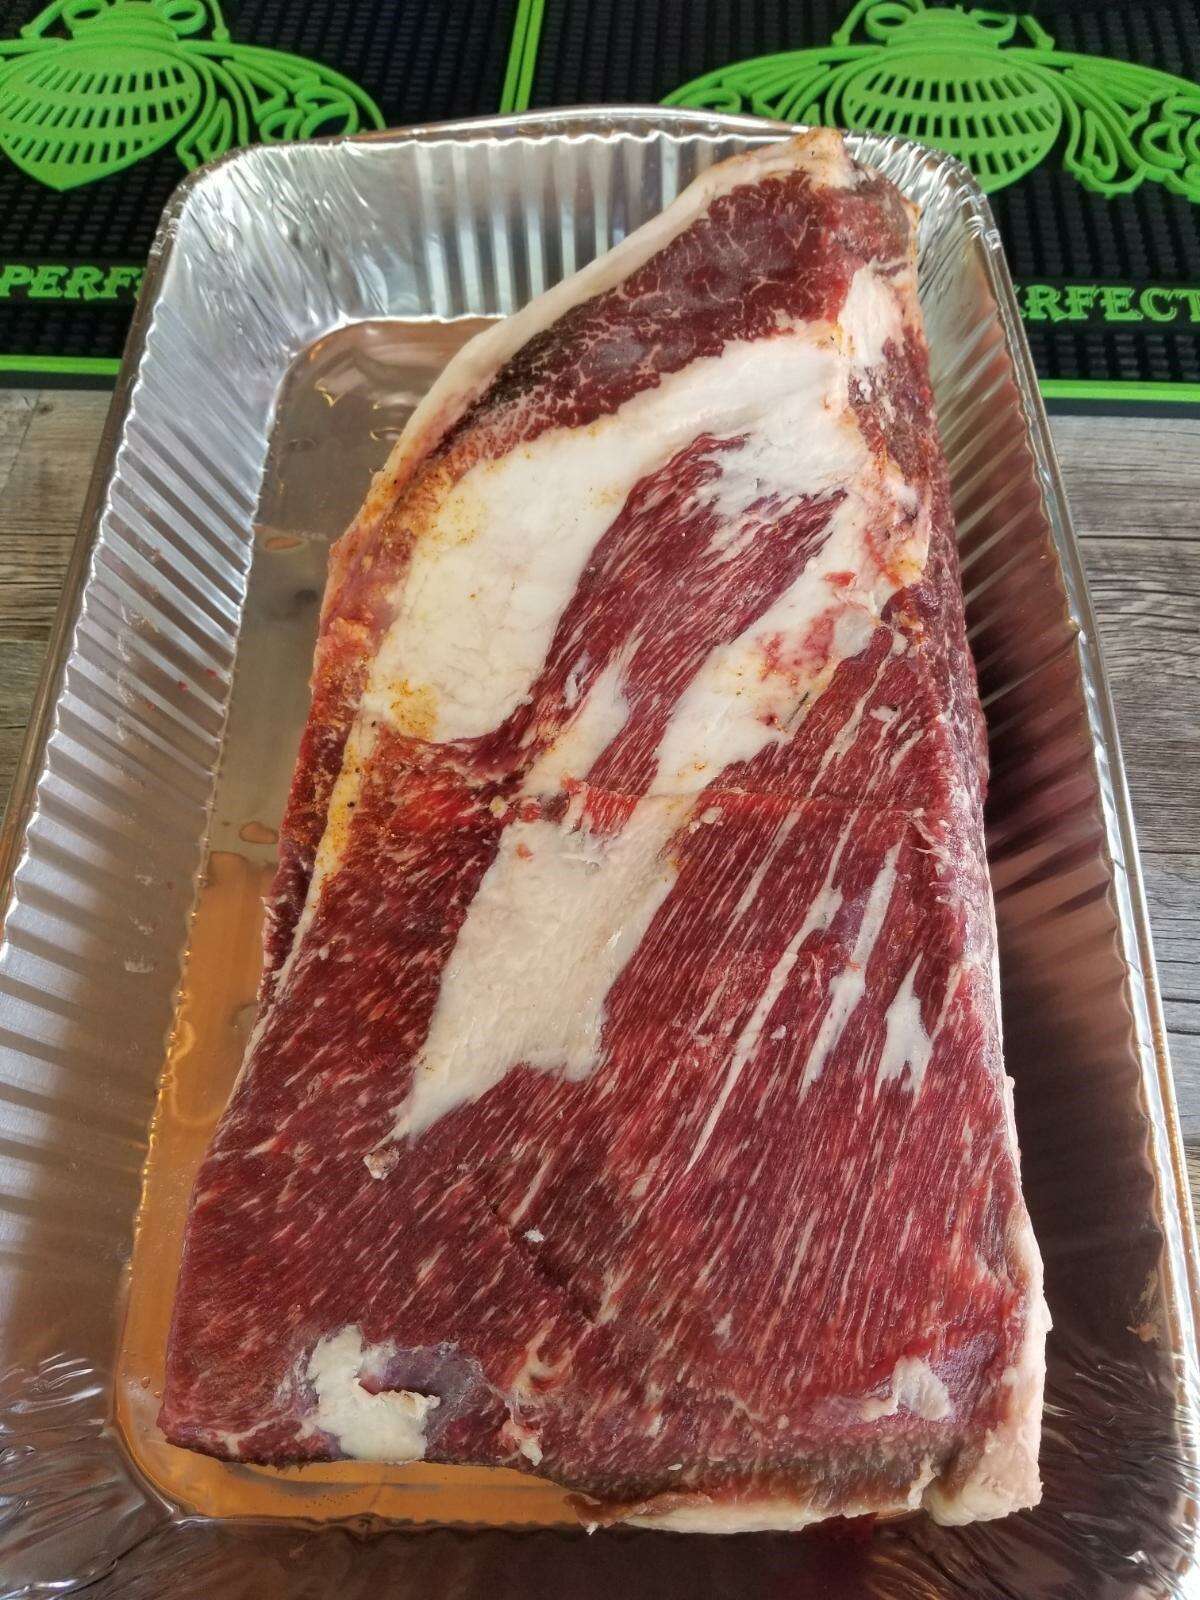 The Smoke Shack at 3714 Broadway this week will debut Wagyu Wednesdays, when Wagyu brisket will be on the menu in combination meat plates and sold by the weight ($24 per pound).